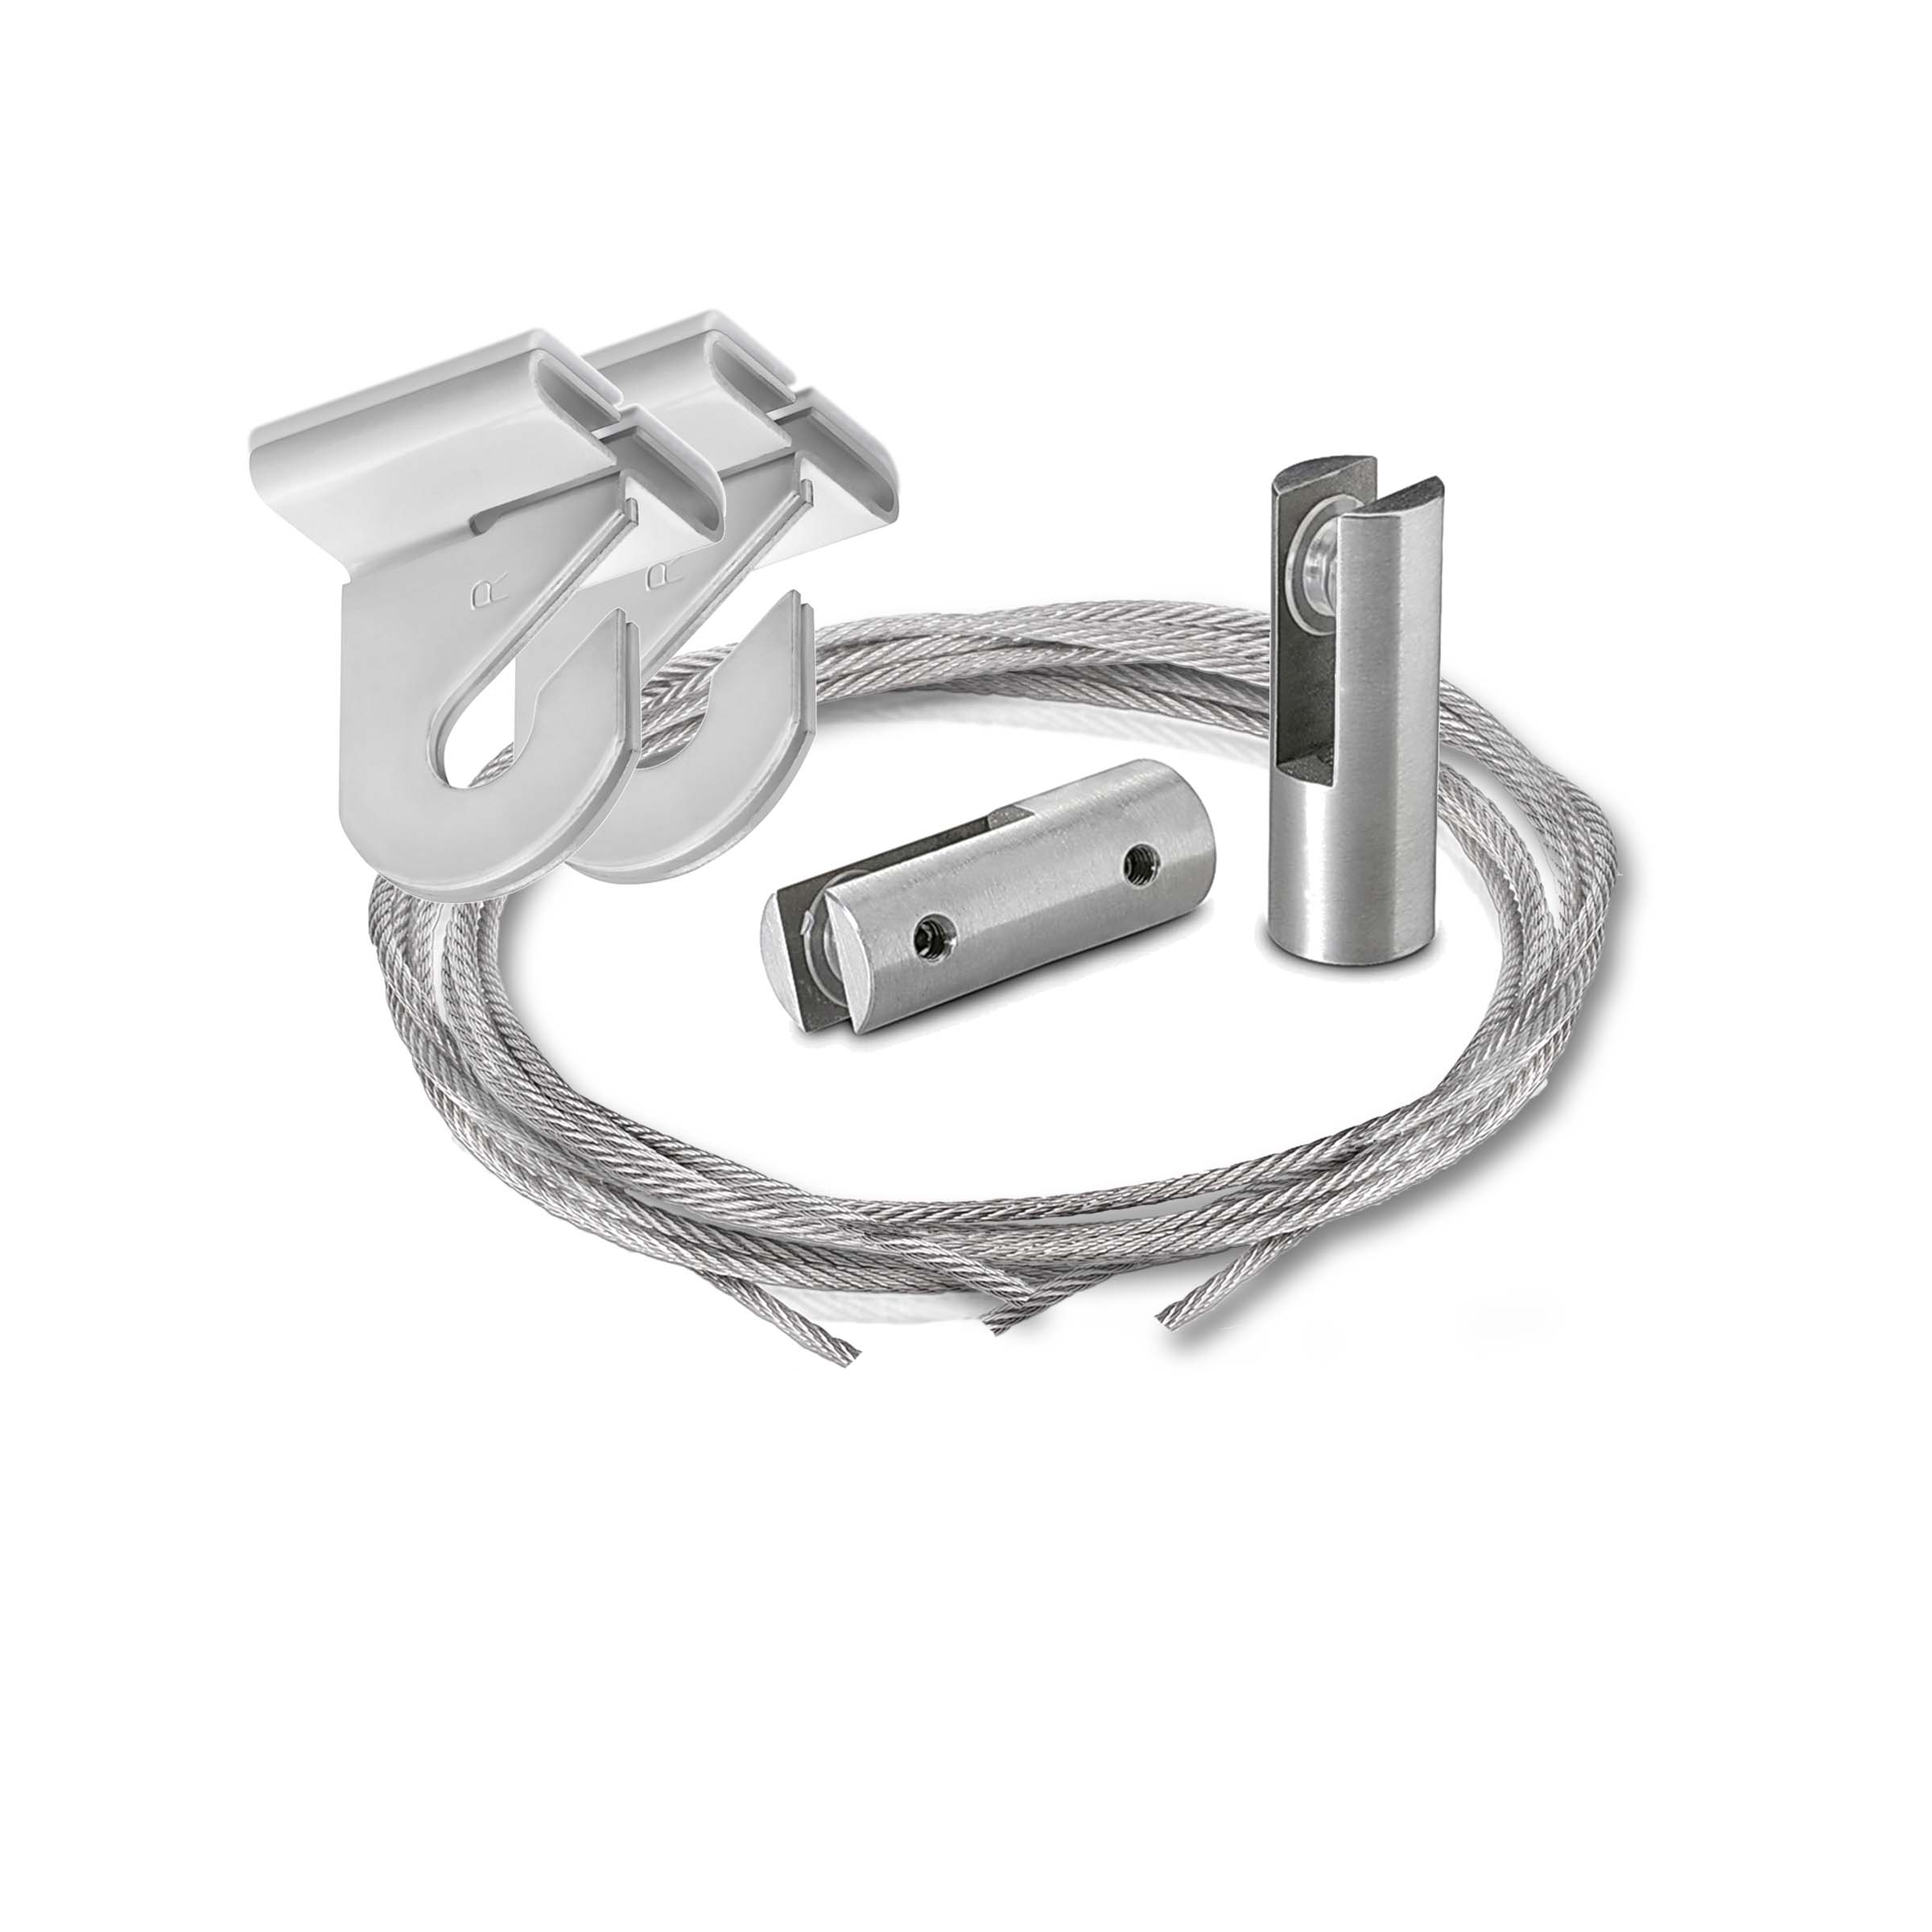 2 Pieces of 96'' Stainless Steel Satin Brushed Suspended Cable Kits for 1/4'' Thick Material (2 Full Sets) - 1/16'' Diameter Cable